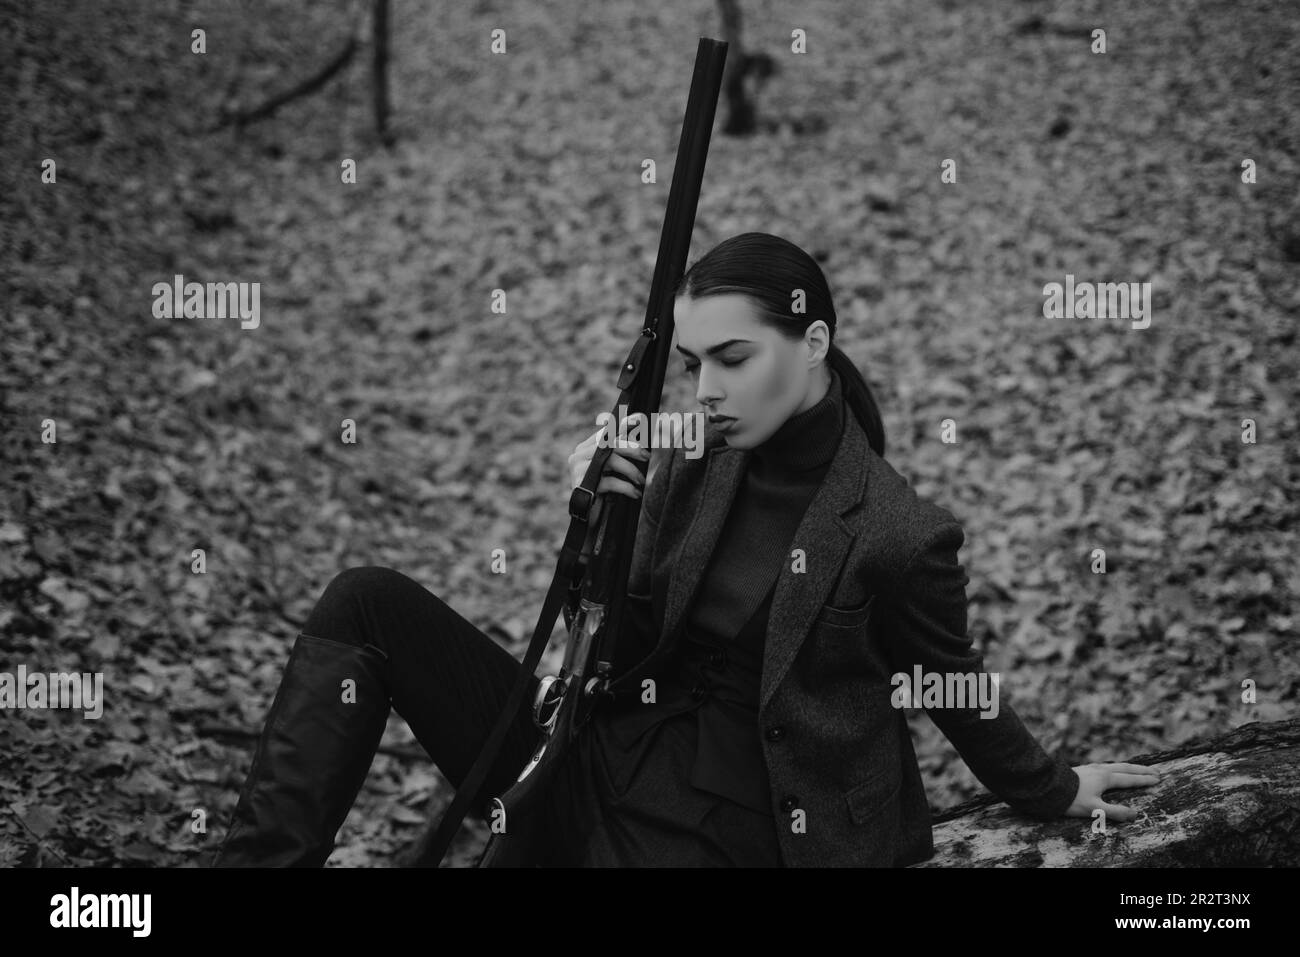 military fashion. achievements of goals. female hunter in forest. successful hunt. hunting sport. girl with rifle. chase hunting. Gun shop. woman with Stock Photo